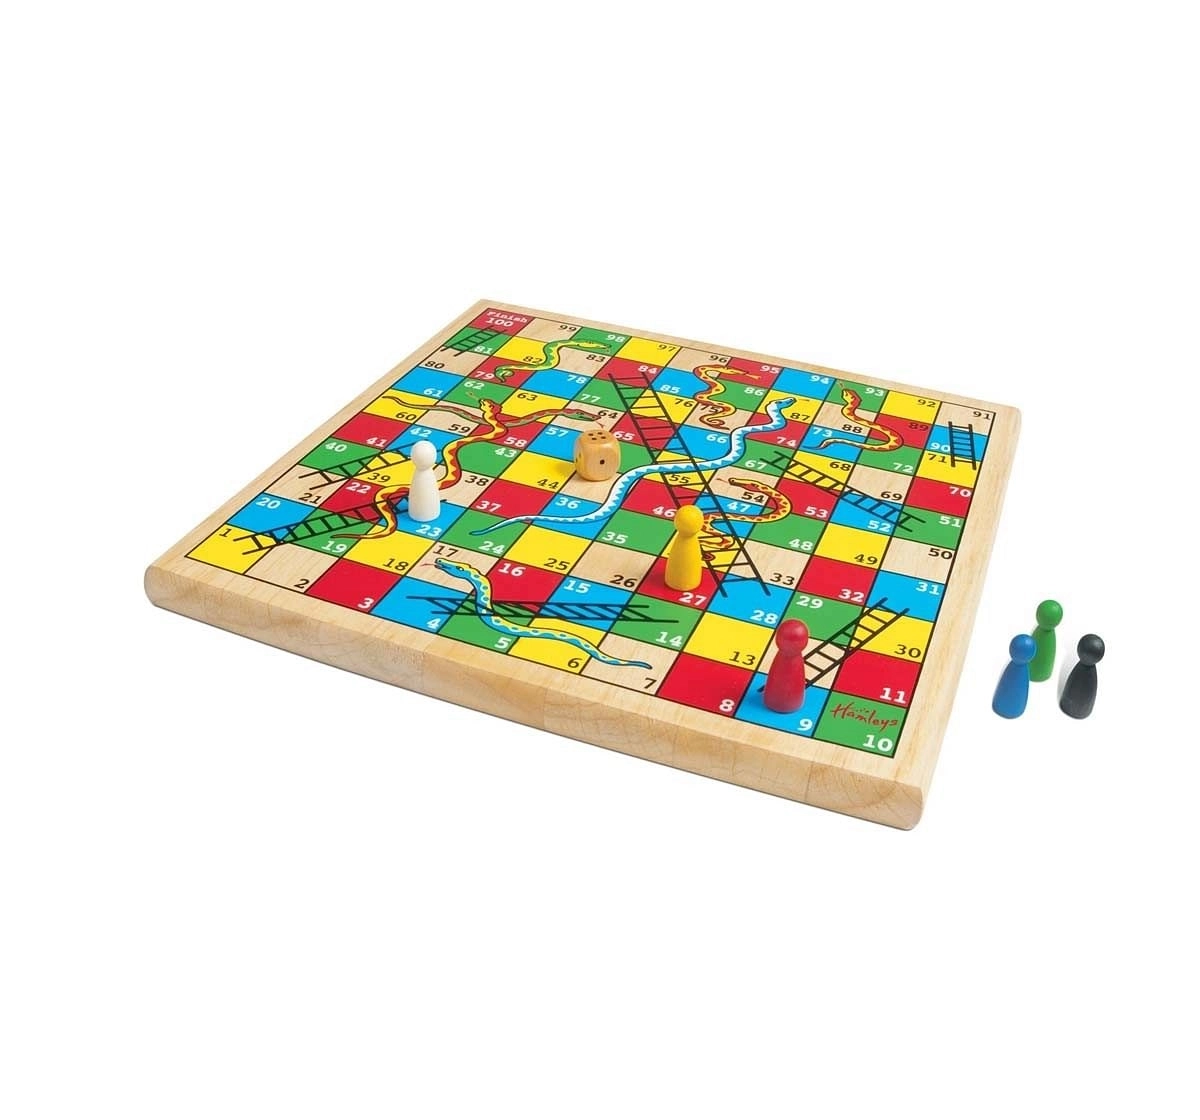 Hamleys Wooden Snakes and Ladders Multi Color Board Game for Kids age 6Y+ 